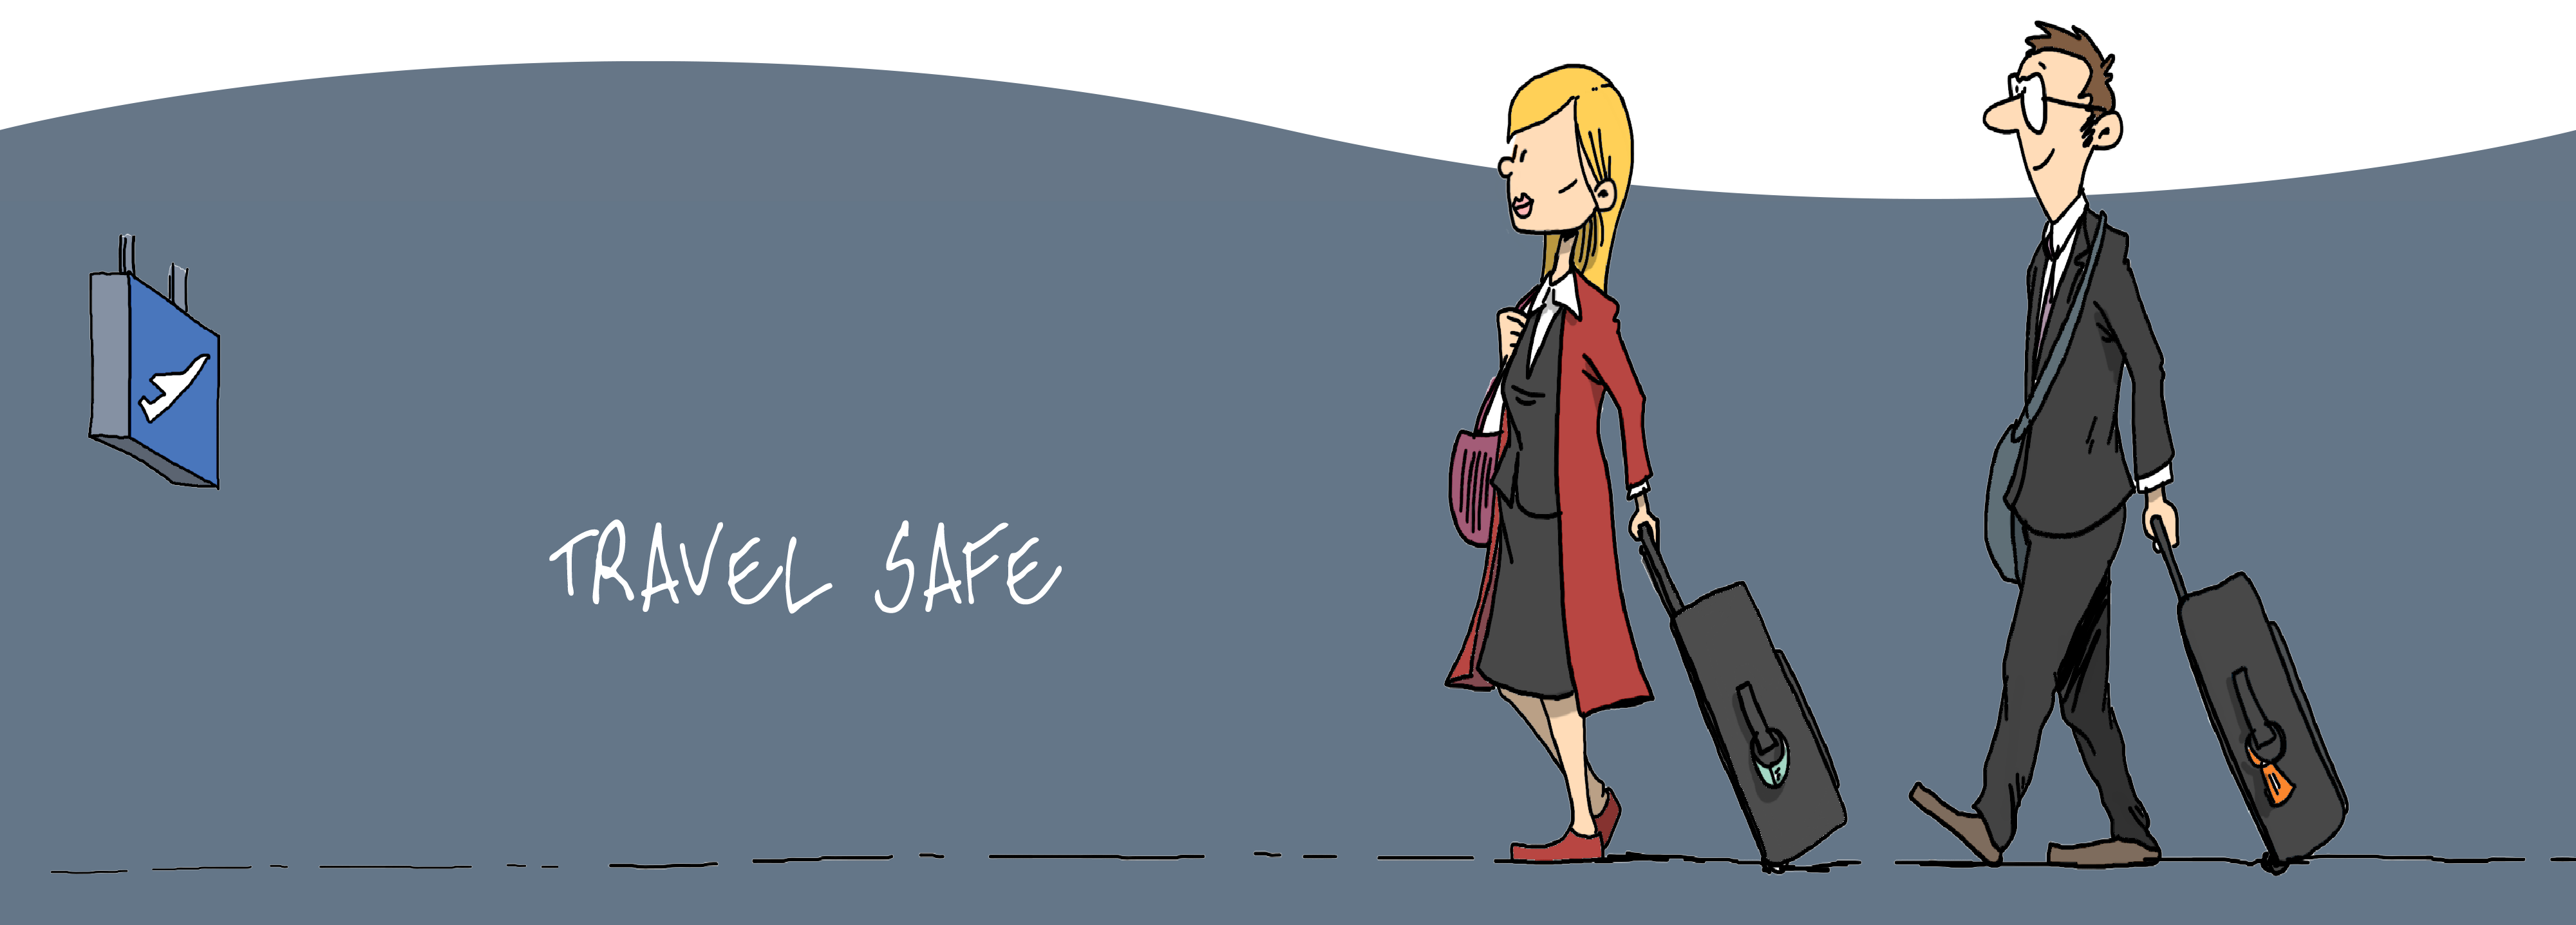 Banner of the project travel safe for a private bank